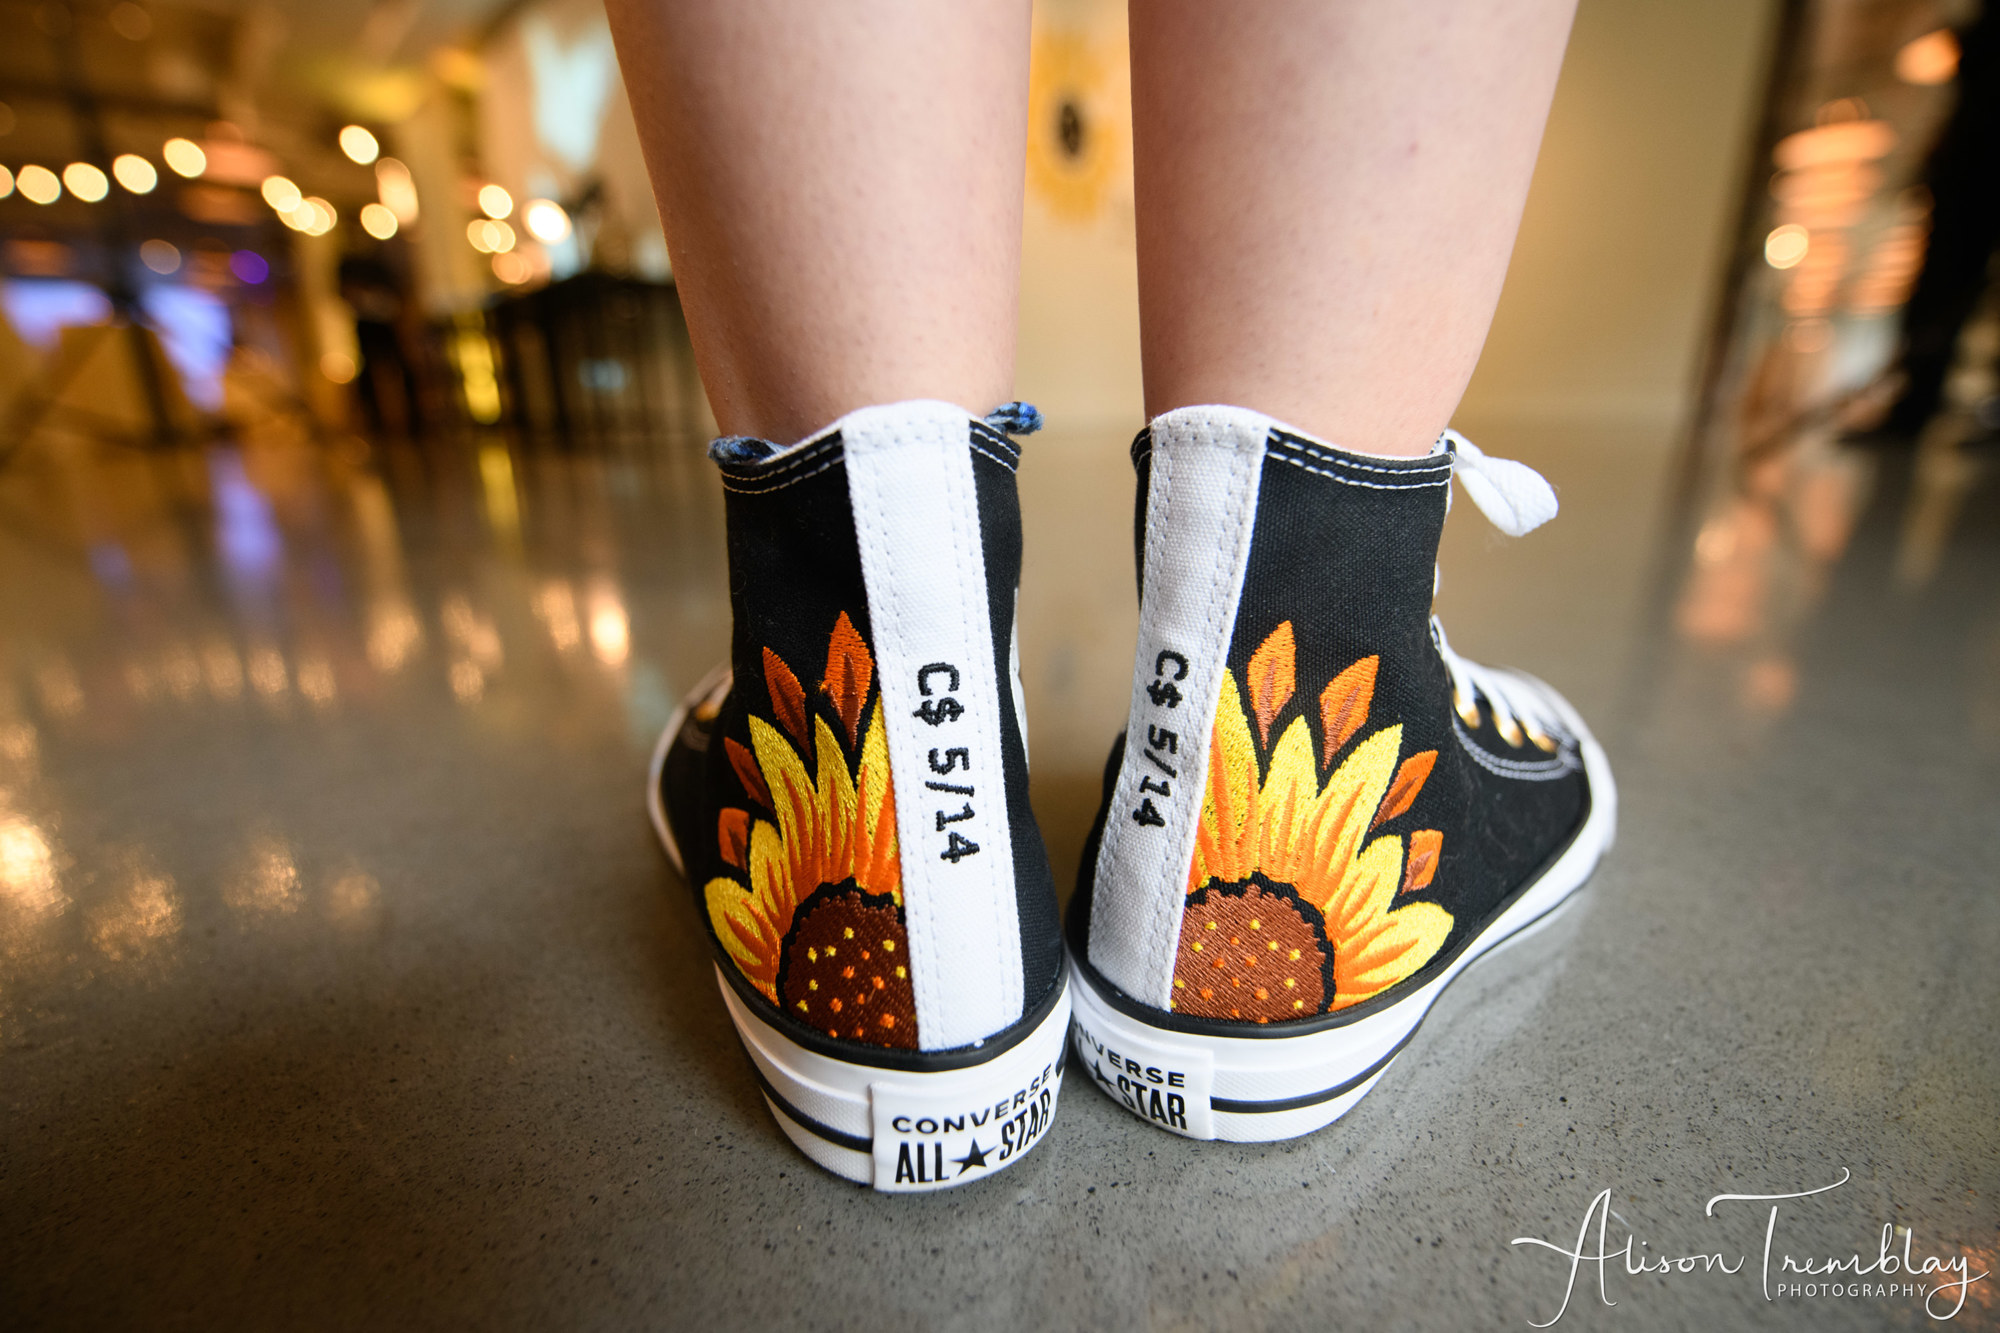 Charlotte's custom black Converse sneakers with sunflower details including her nickname and Bat Mitzvah date at Charlotte's Sunflower and Butterfly Bat Mitzvah Party at Eaton in Washington, DC | Pop Color Events | Adding a Pop of Color to Bar & Bat Mitzvahs in DC, MD & VA | Photo by: Alison Tremblay